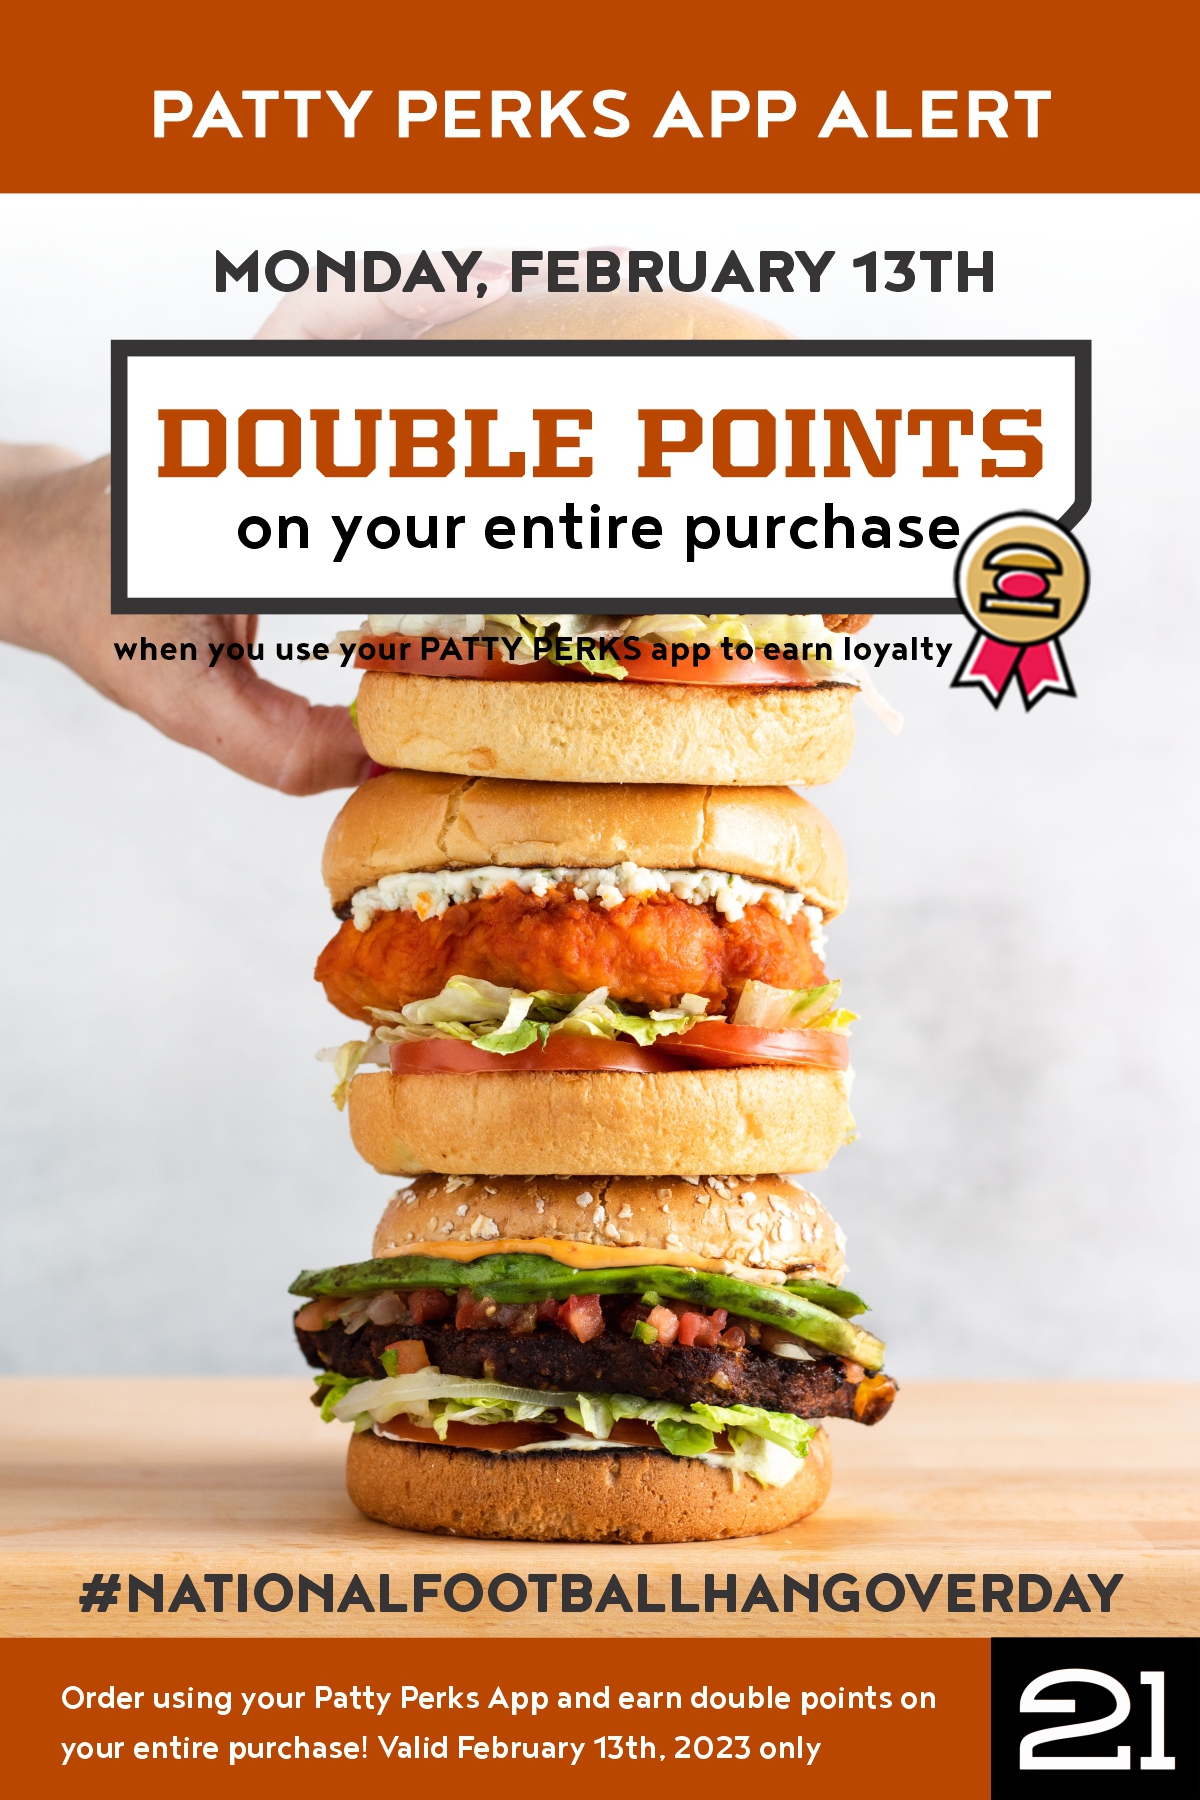 Double Up on Double Points For Your Football Hangover!
Promotion: Order In the App for Double Points to celebrate the day after the game! No limits on number purchased. Valid February 13th, 2023 only.
